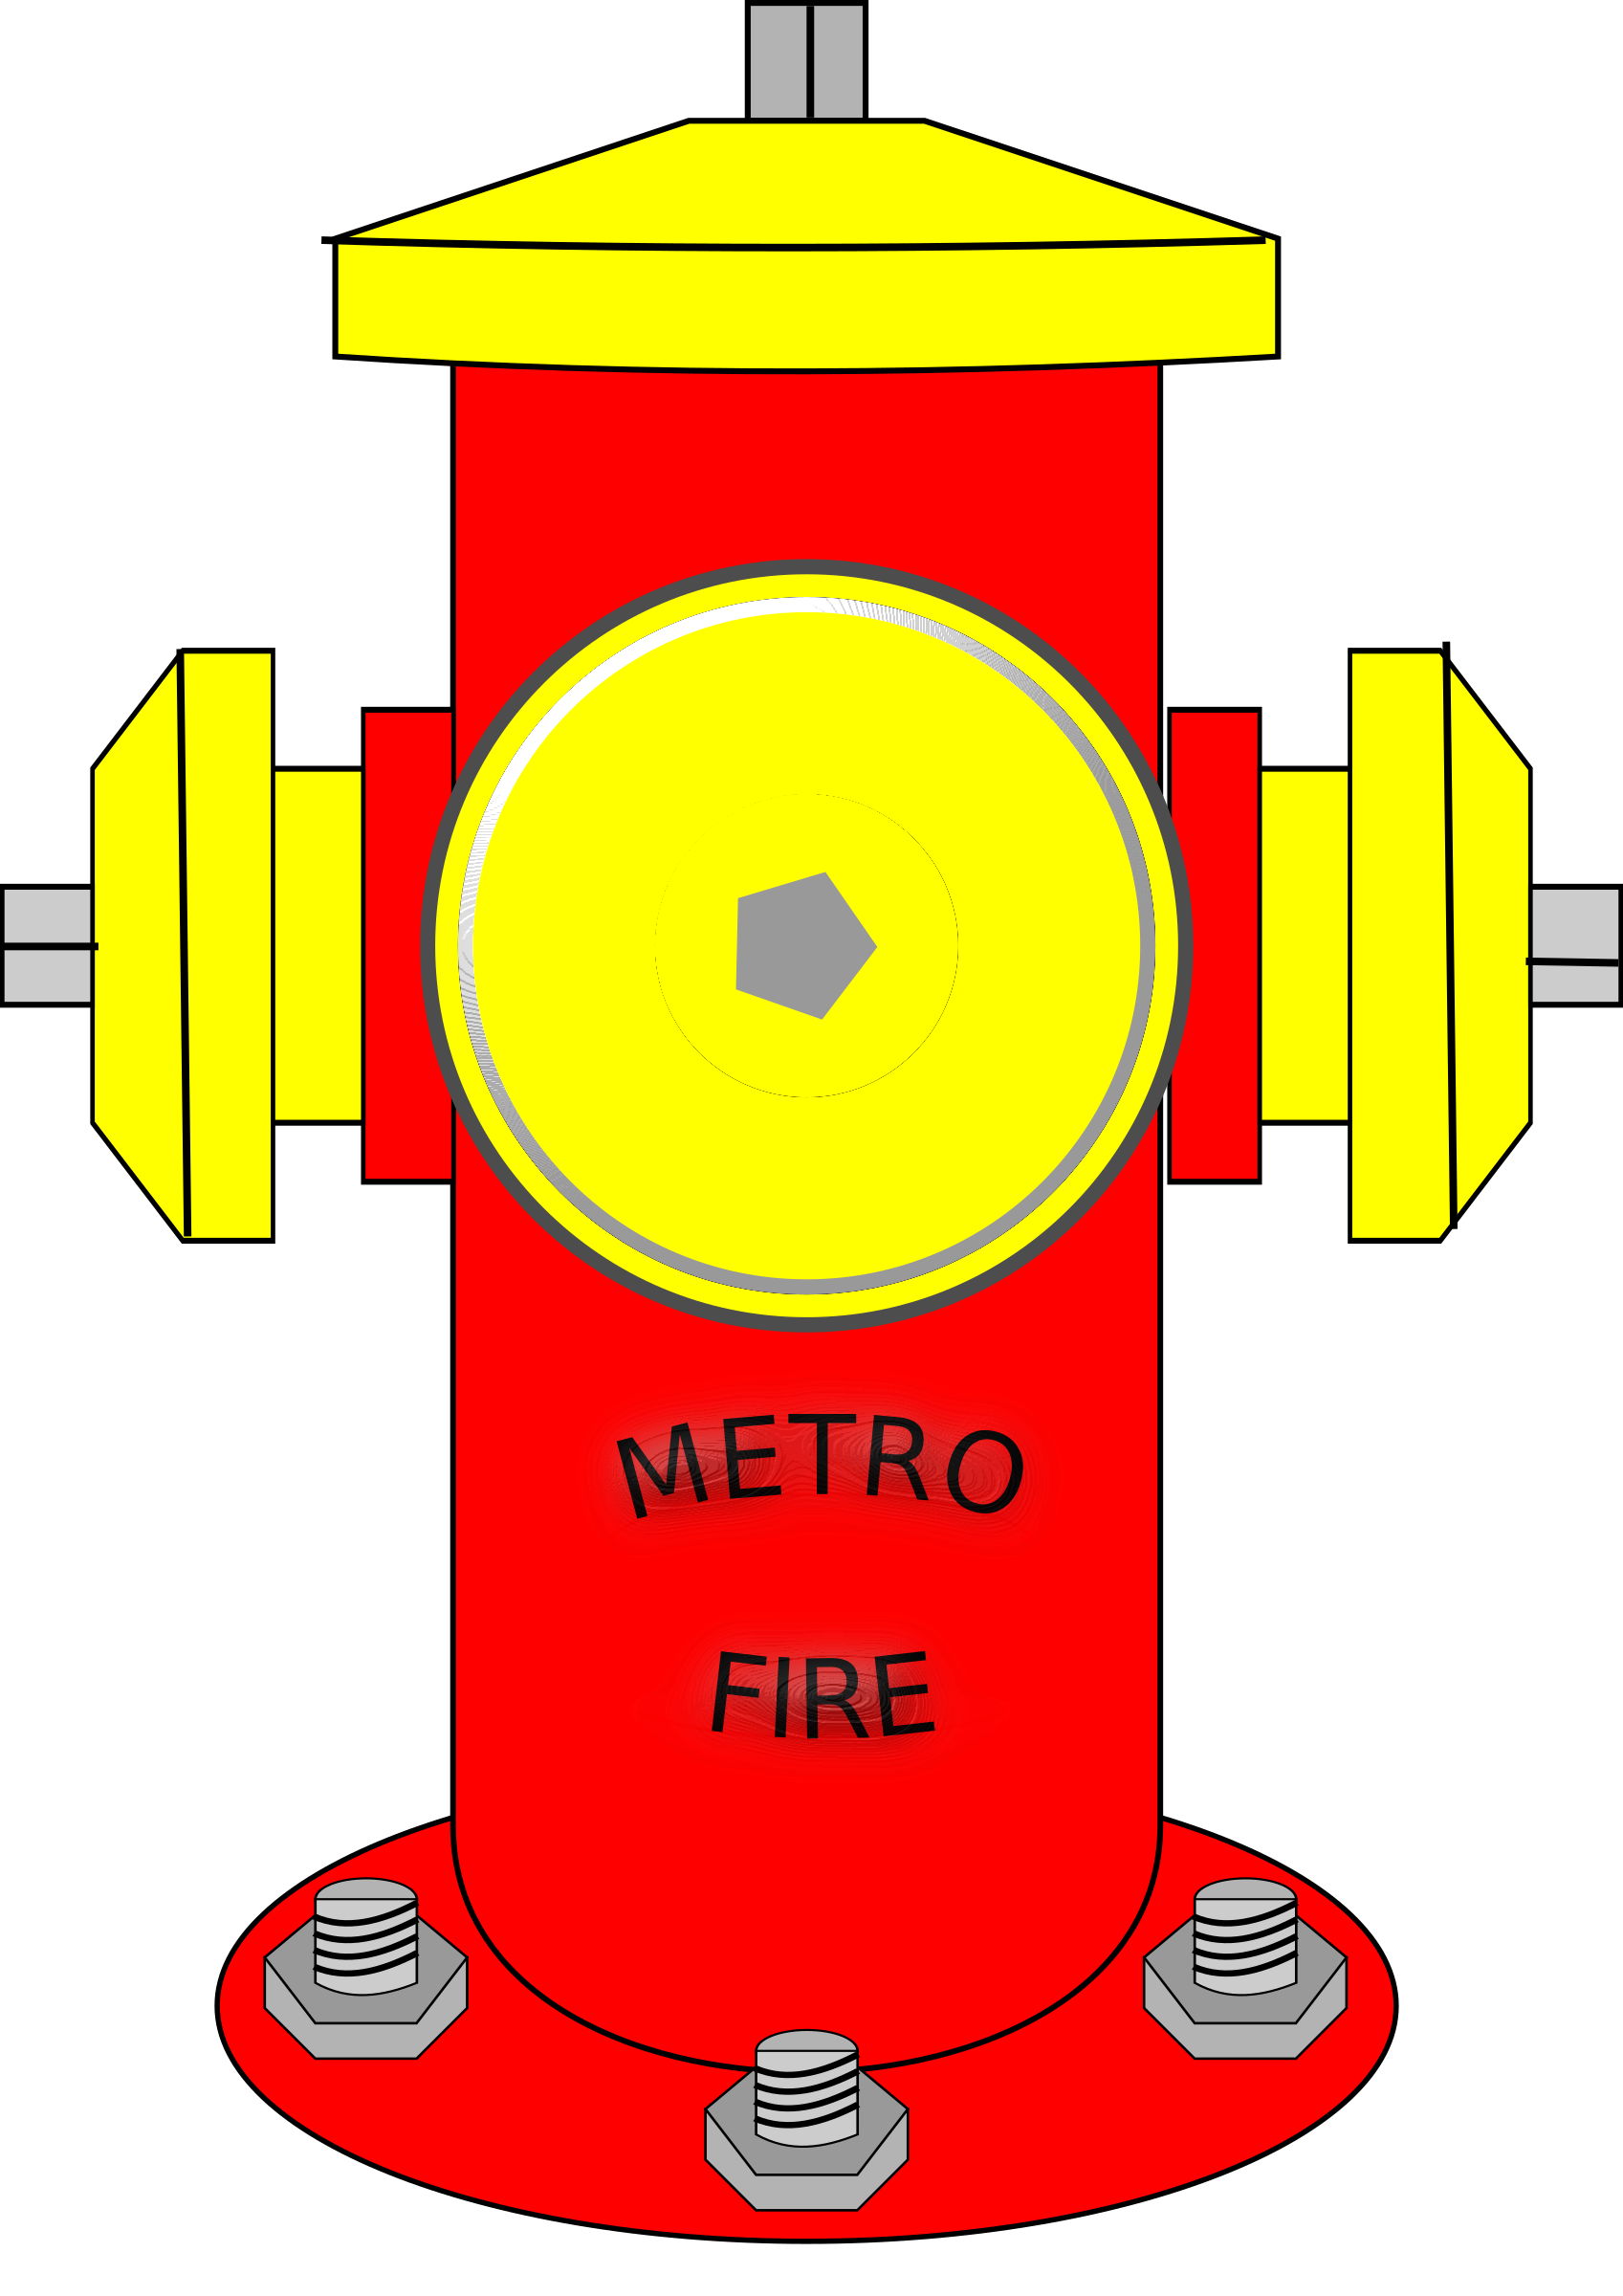 Fire Hydrant vector clipart free photo. 